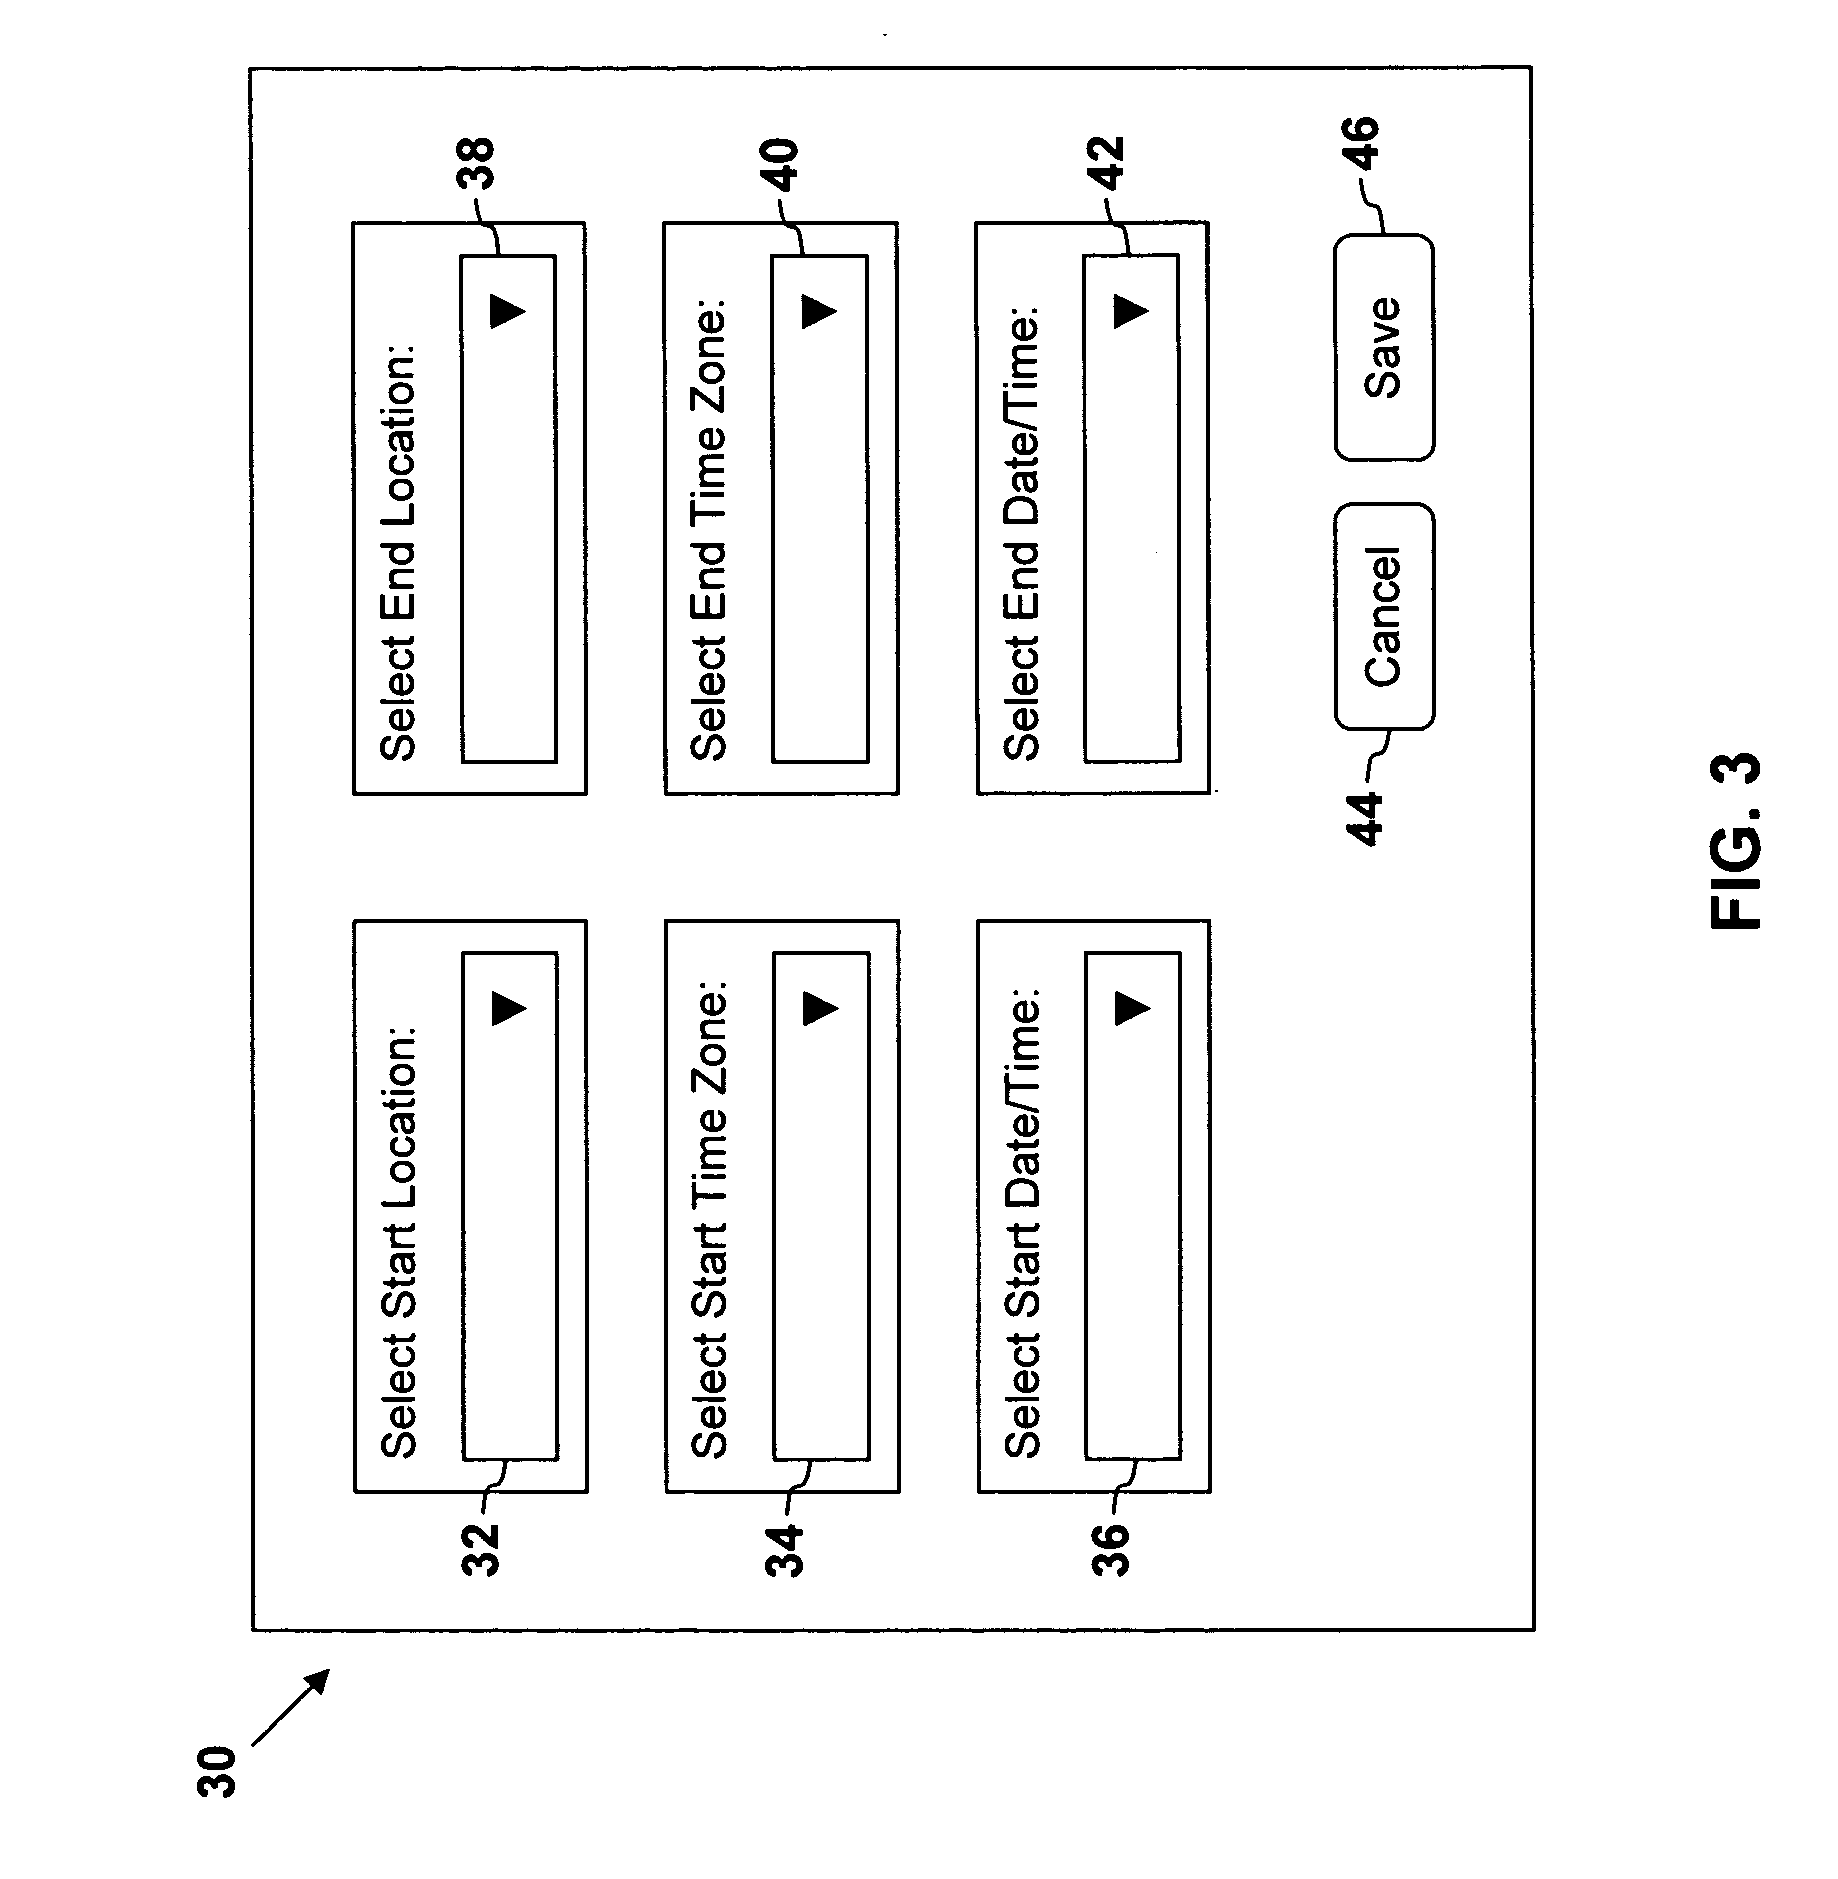 Method, system, and computer program product for conveying a changing local time zone in an electronic calendar